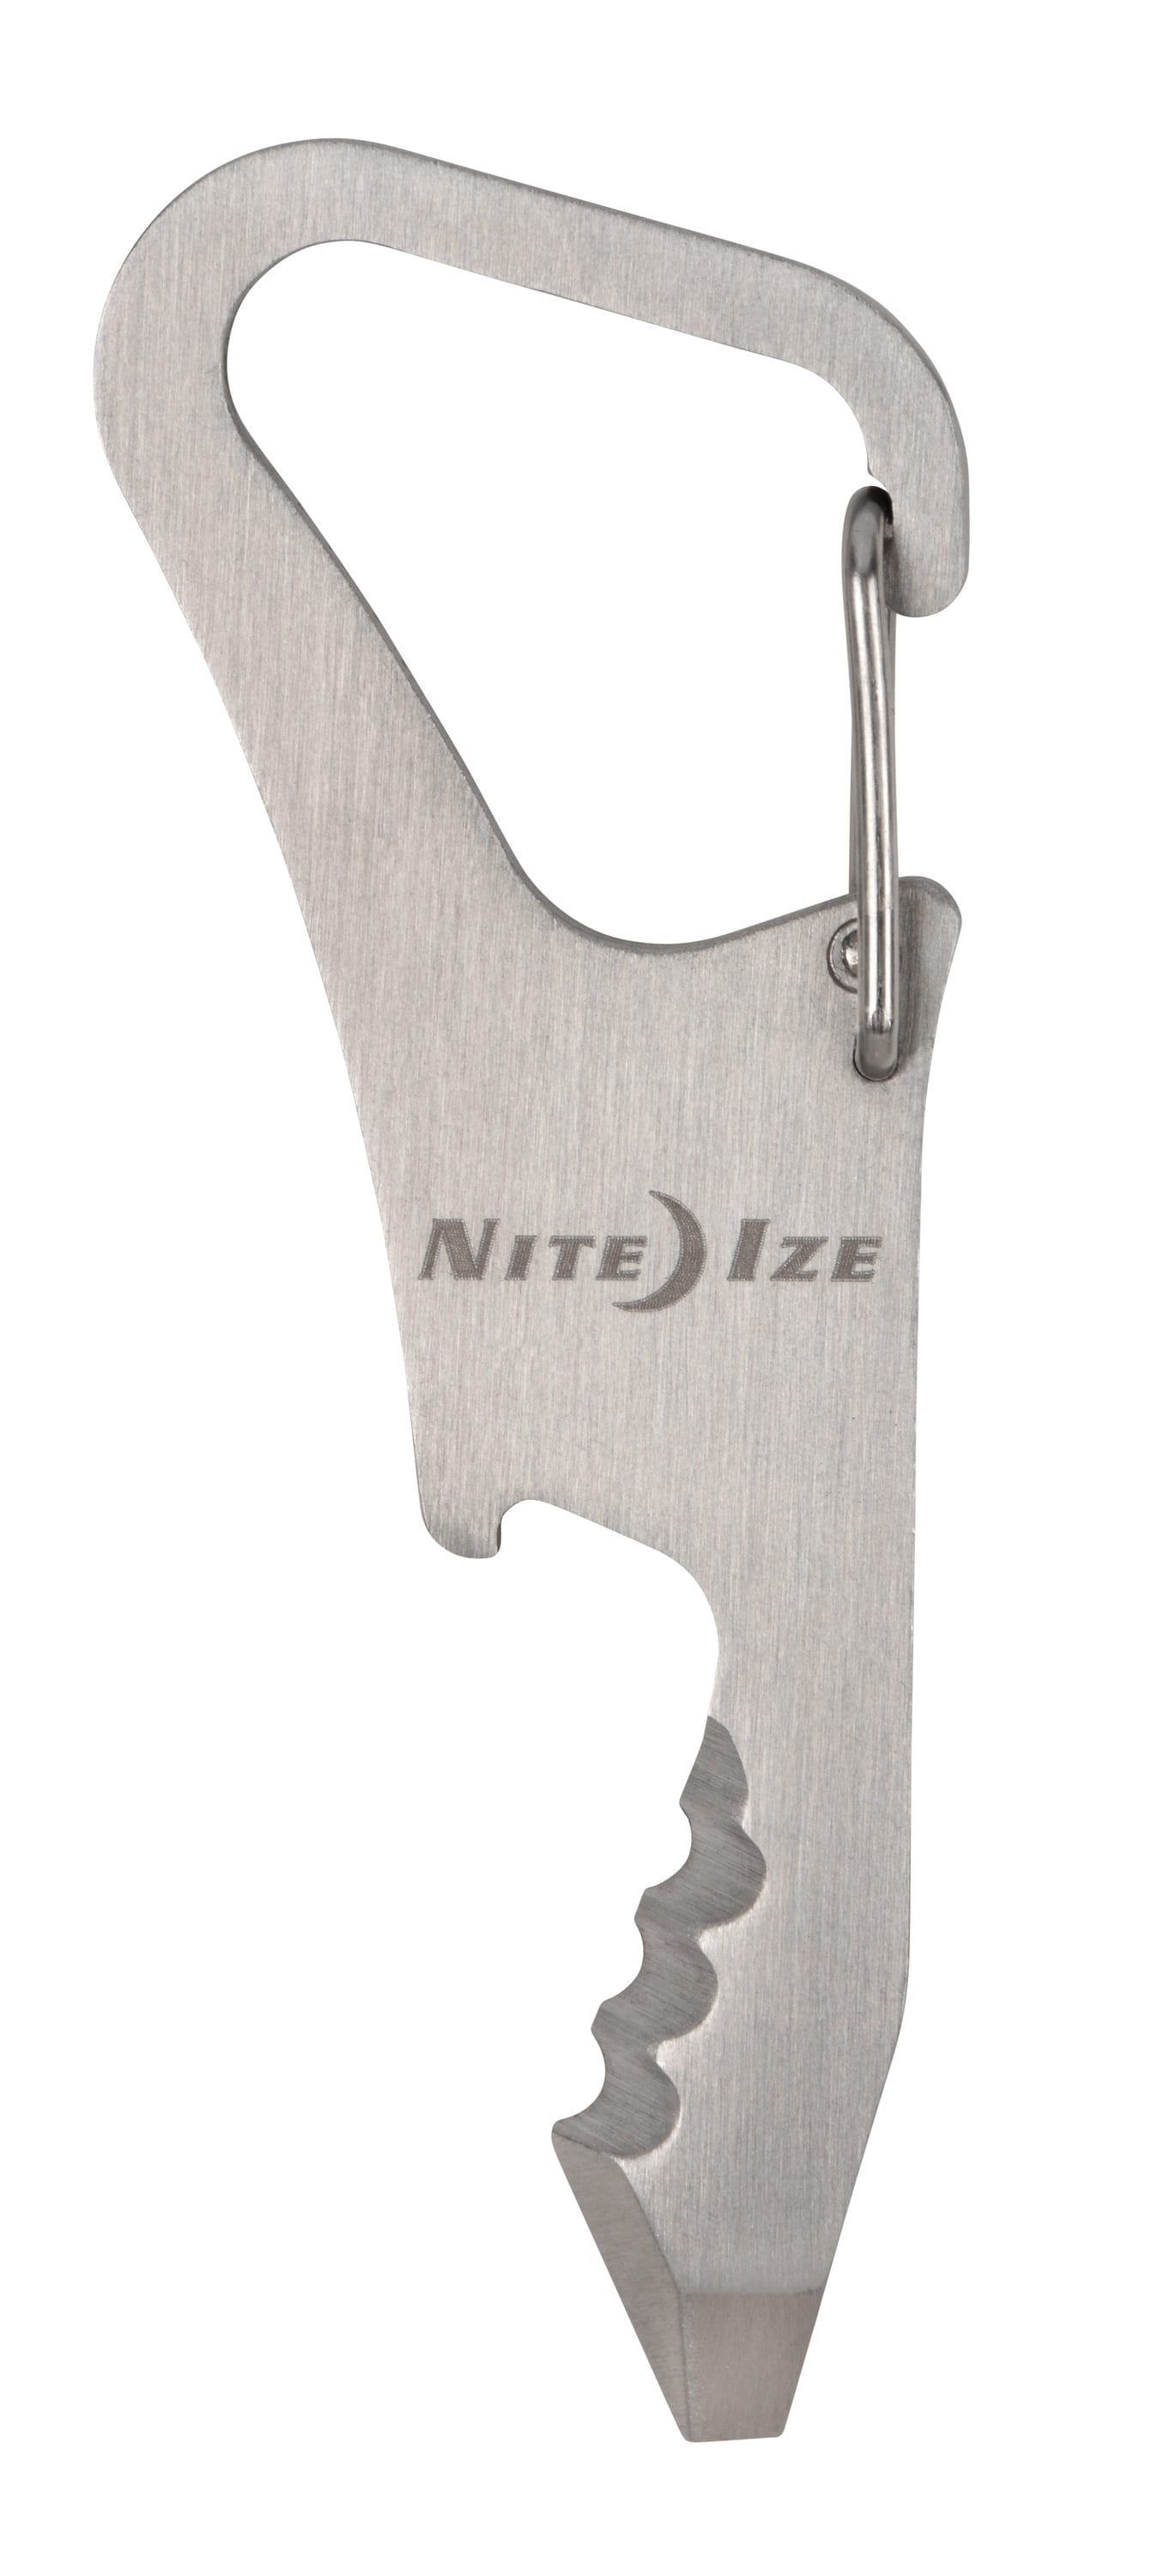 Nite Ize Stainless Steel Snap-Hook Key Ring with 5-in-1 Mini Multi